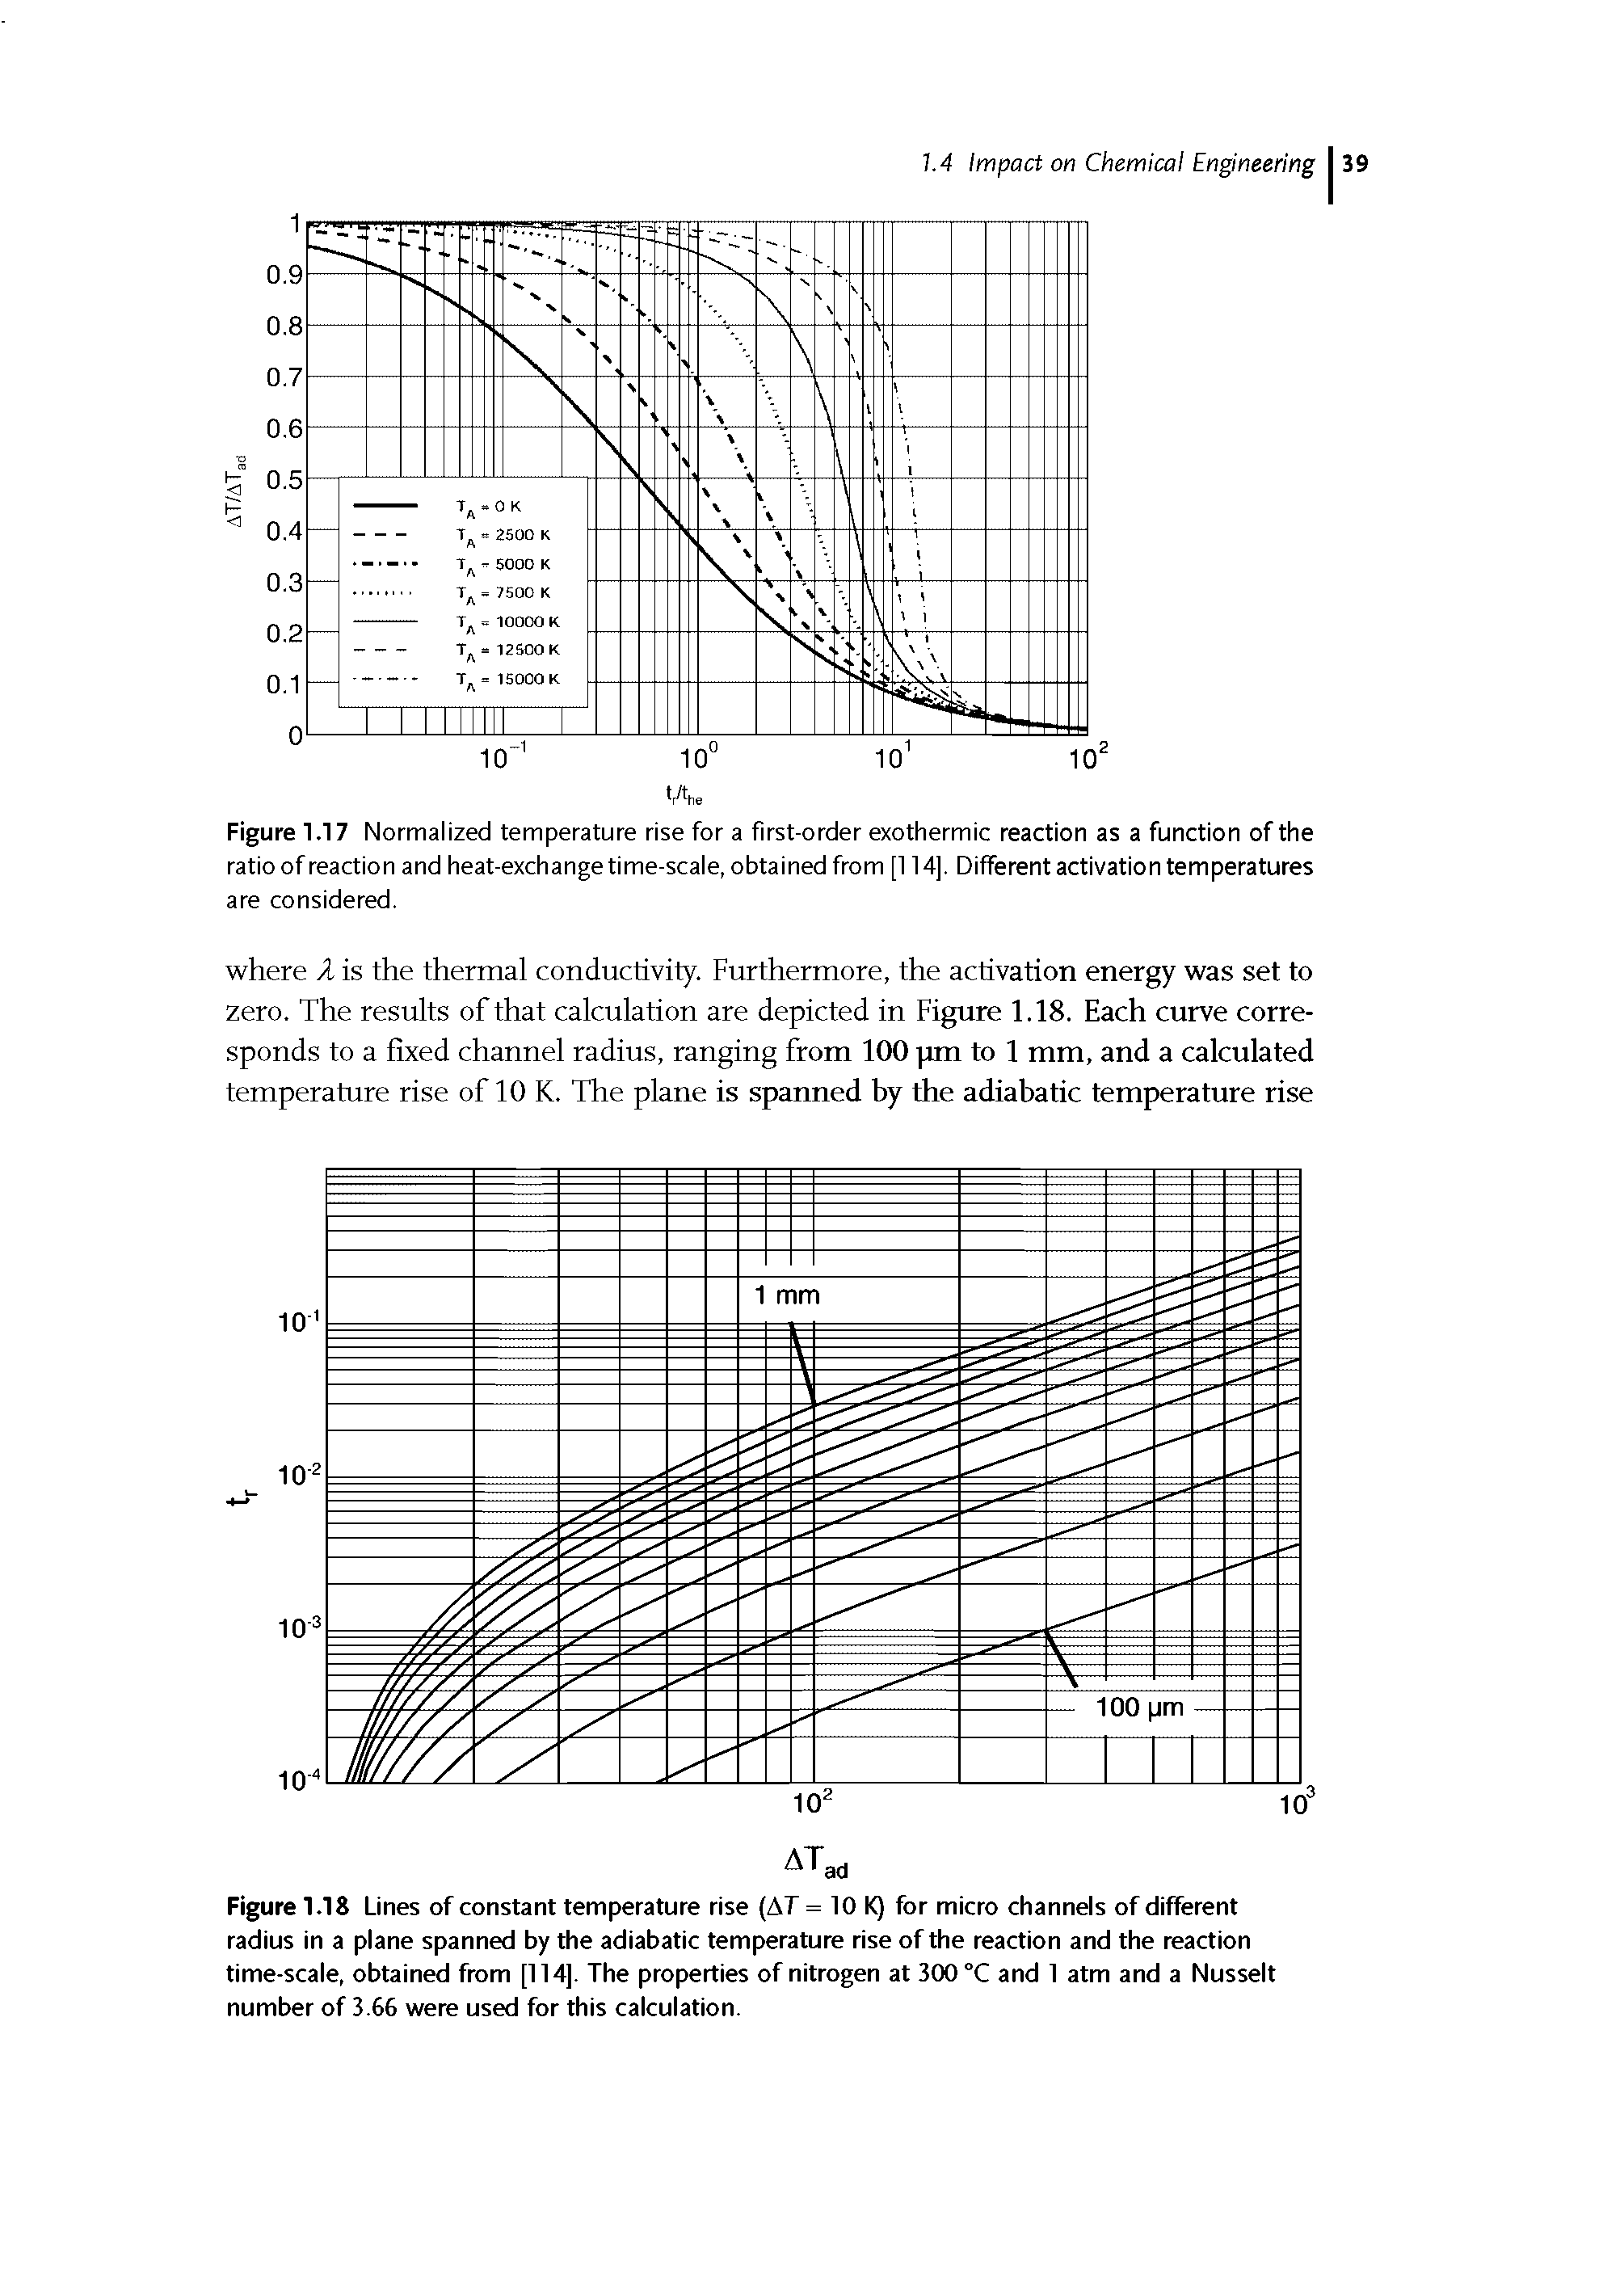 Figure 1.18 Lines of constant temperature rise AT = 10 K) for micro channels of different radius in a plane spanned by the adiabatic temperature rise of the reaction and the reaction time-scale, obtained from [114]. The properties of nitrogen at 300 °C and 1 atm and a Nusselt number of 3.66 were used for this calculation.